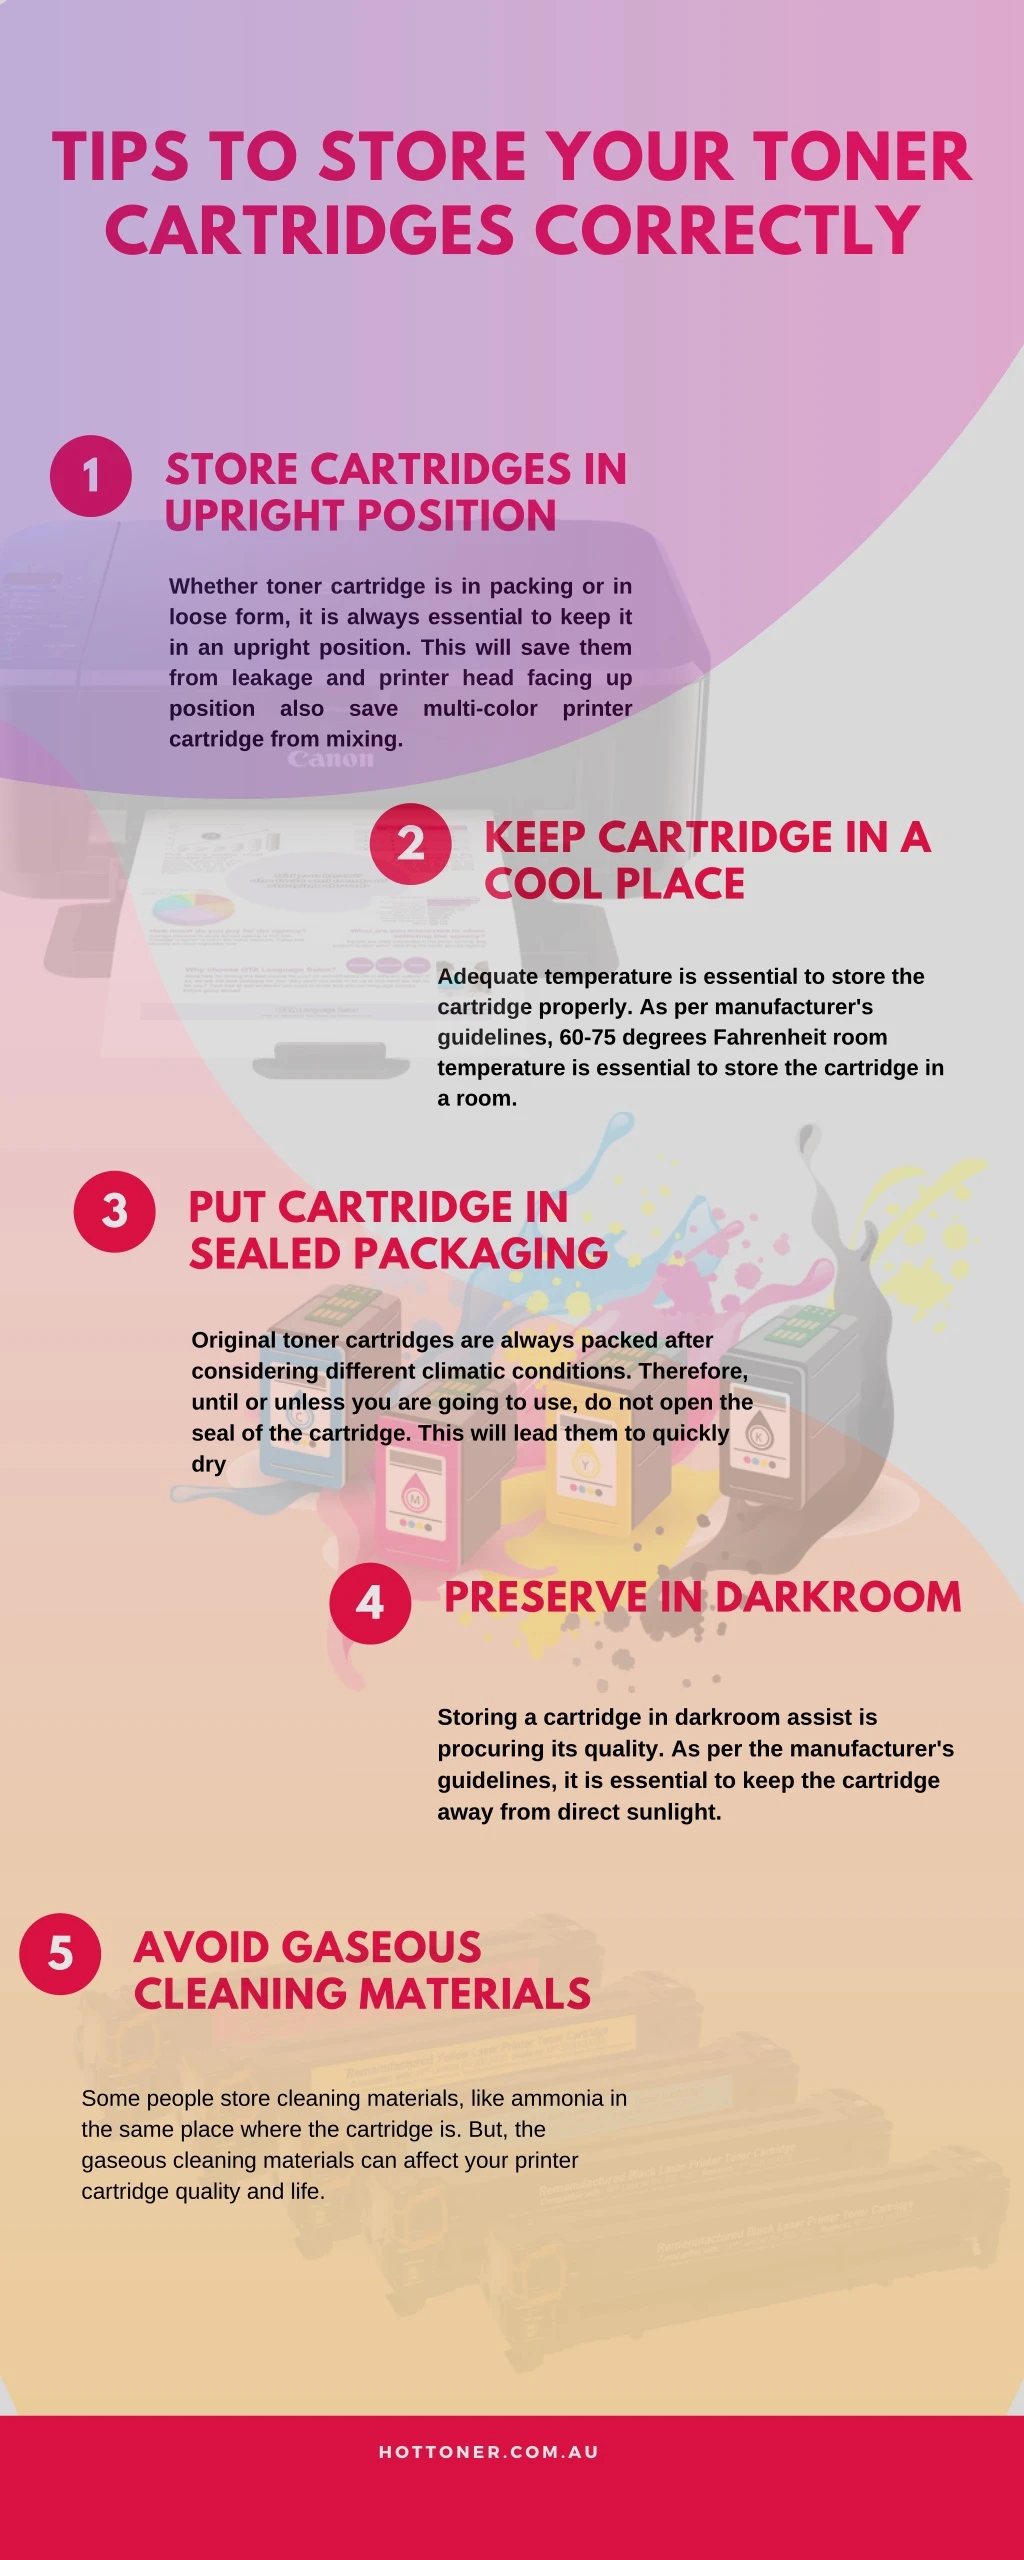 tips to store your toner cartridges correctly